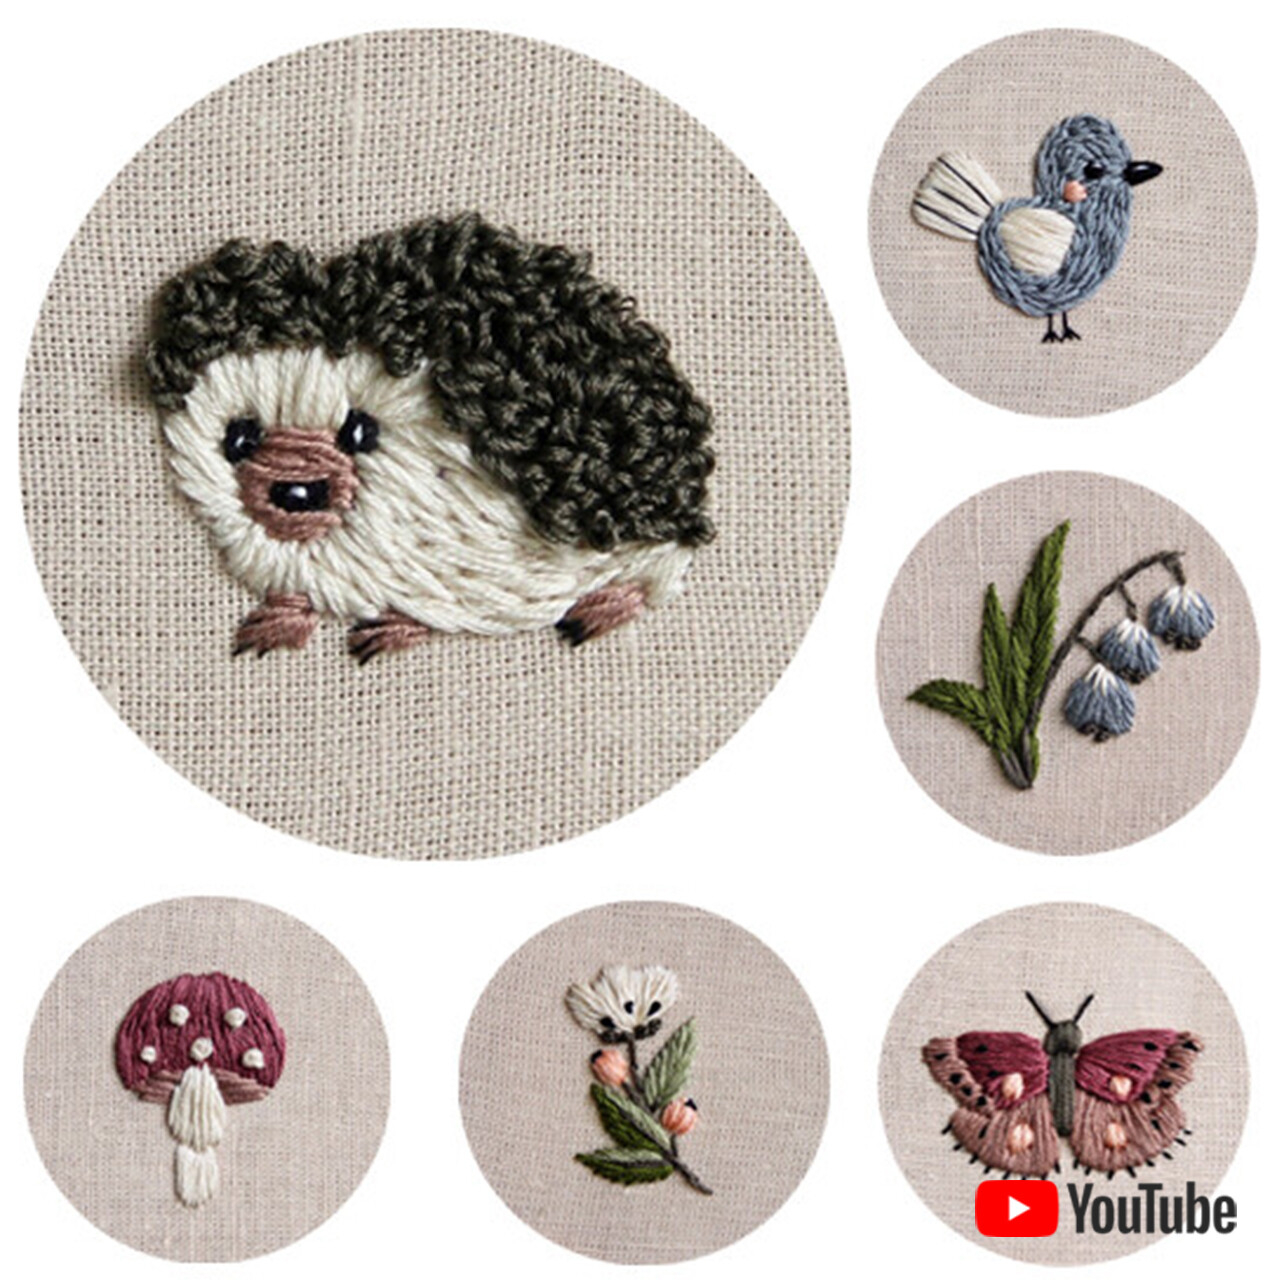 "11 elements for embroidery" pdf pattern 26 cm (10") or 3.5" + video tutorial